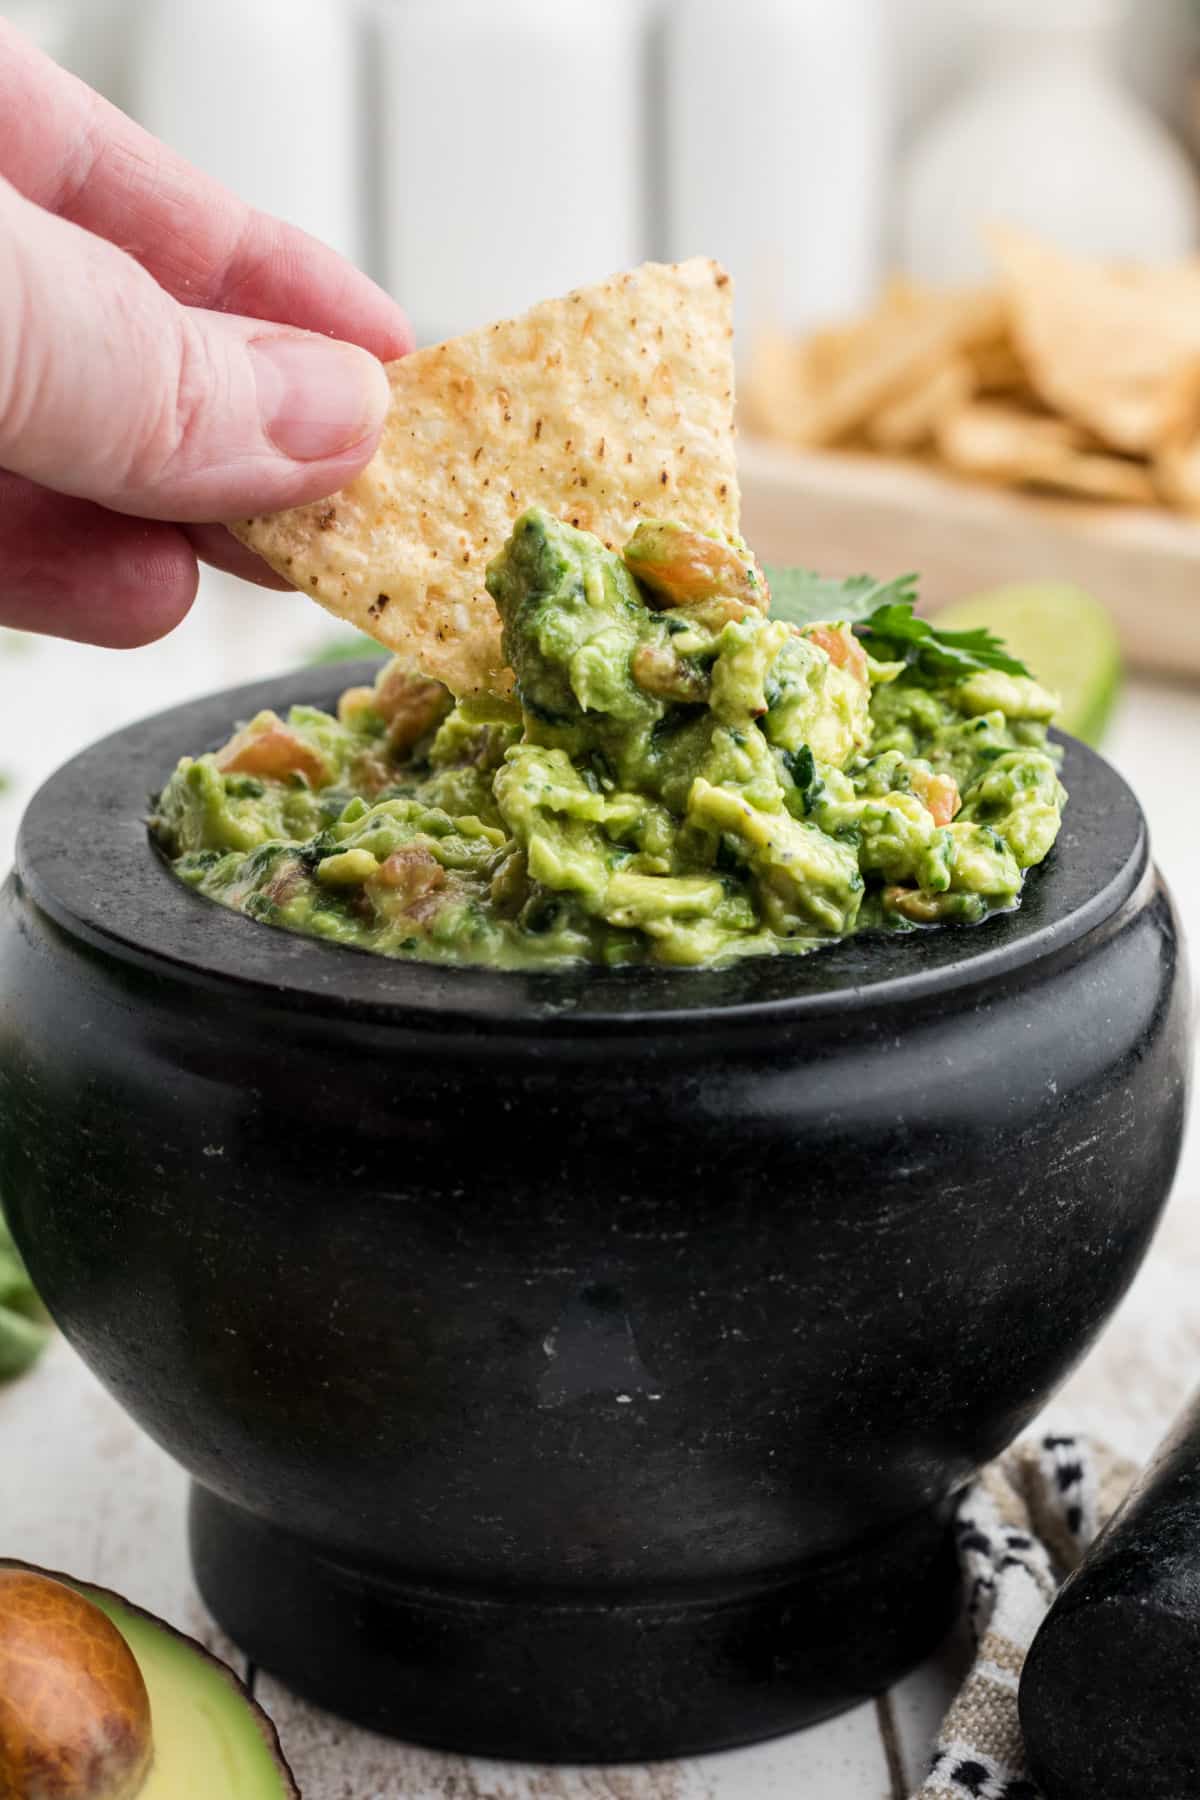 A chip being dipped into some molcajete guacamole.